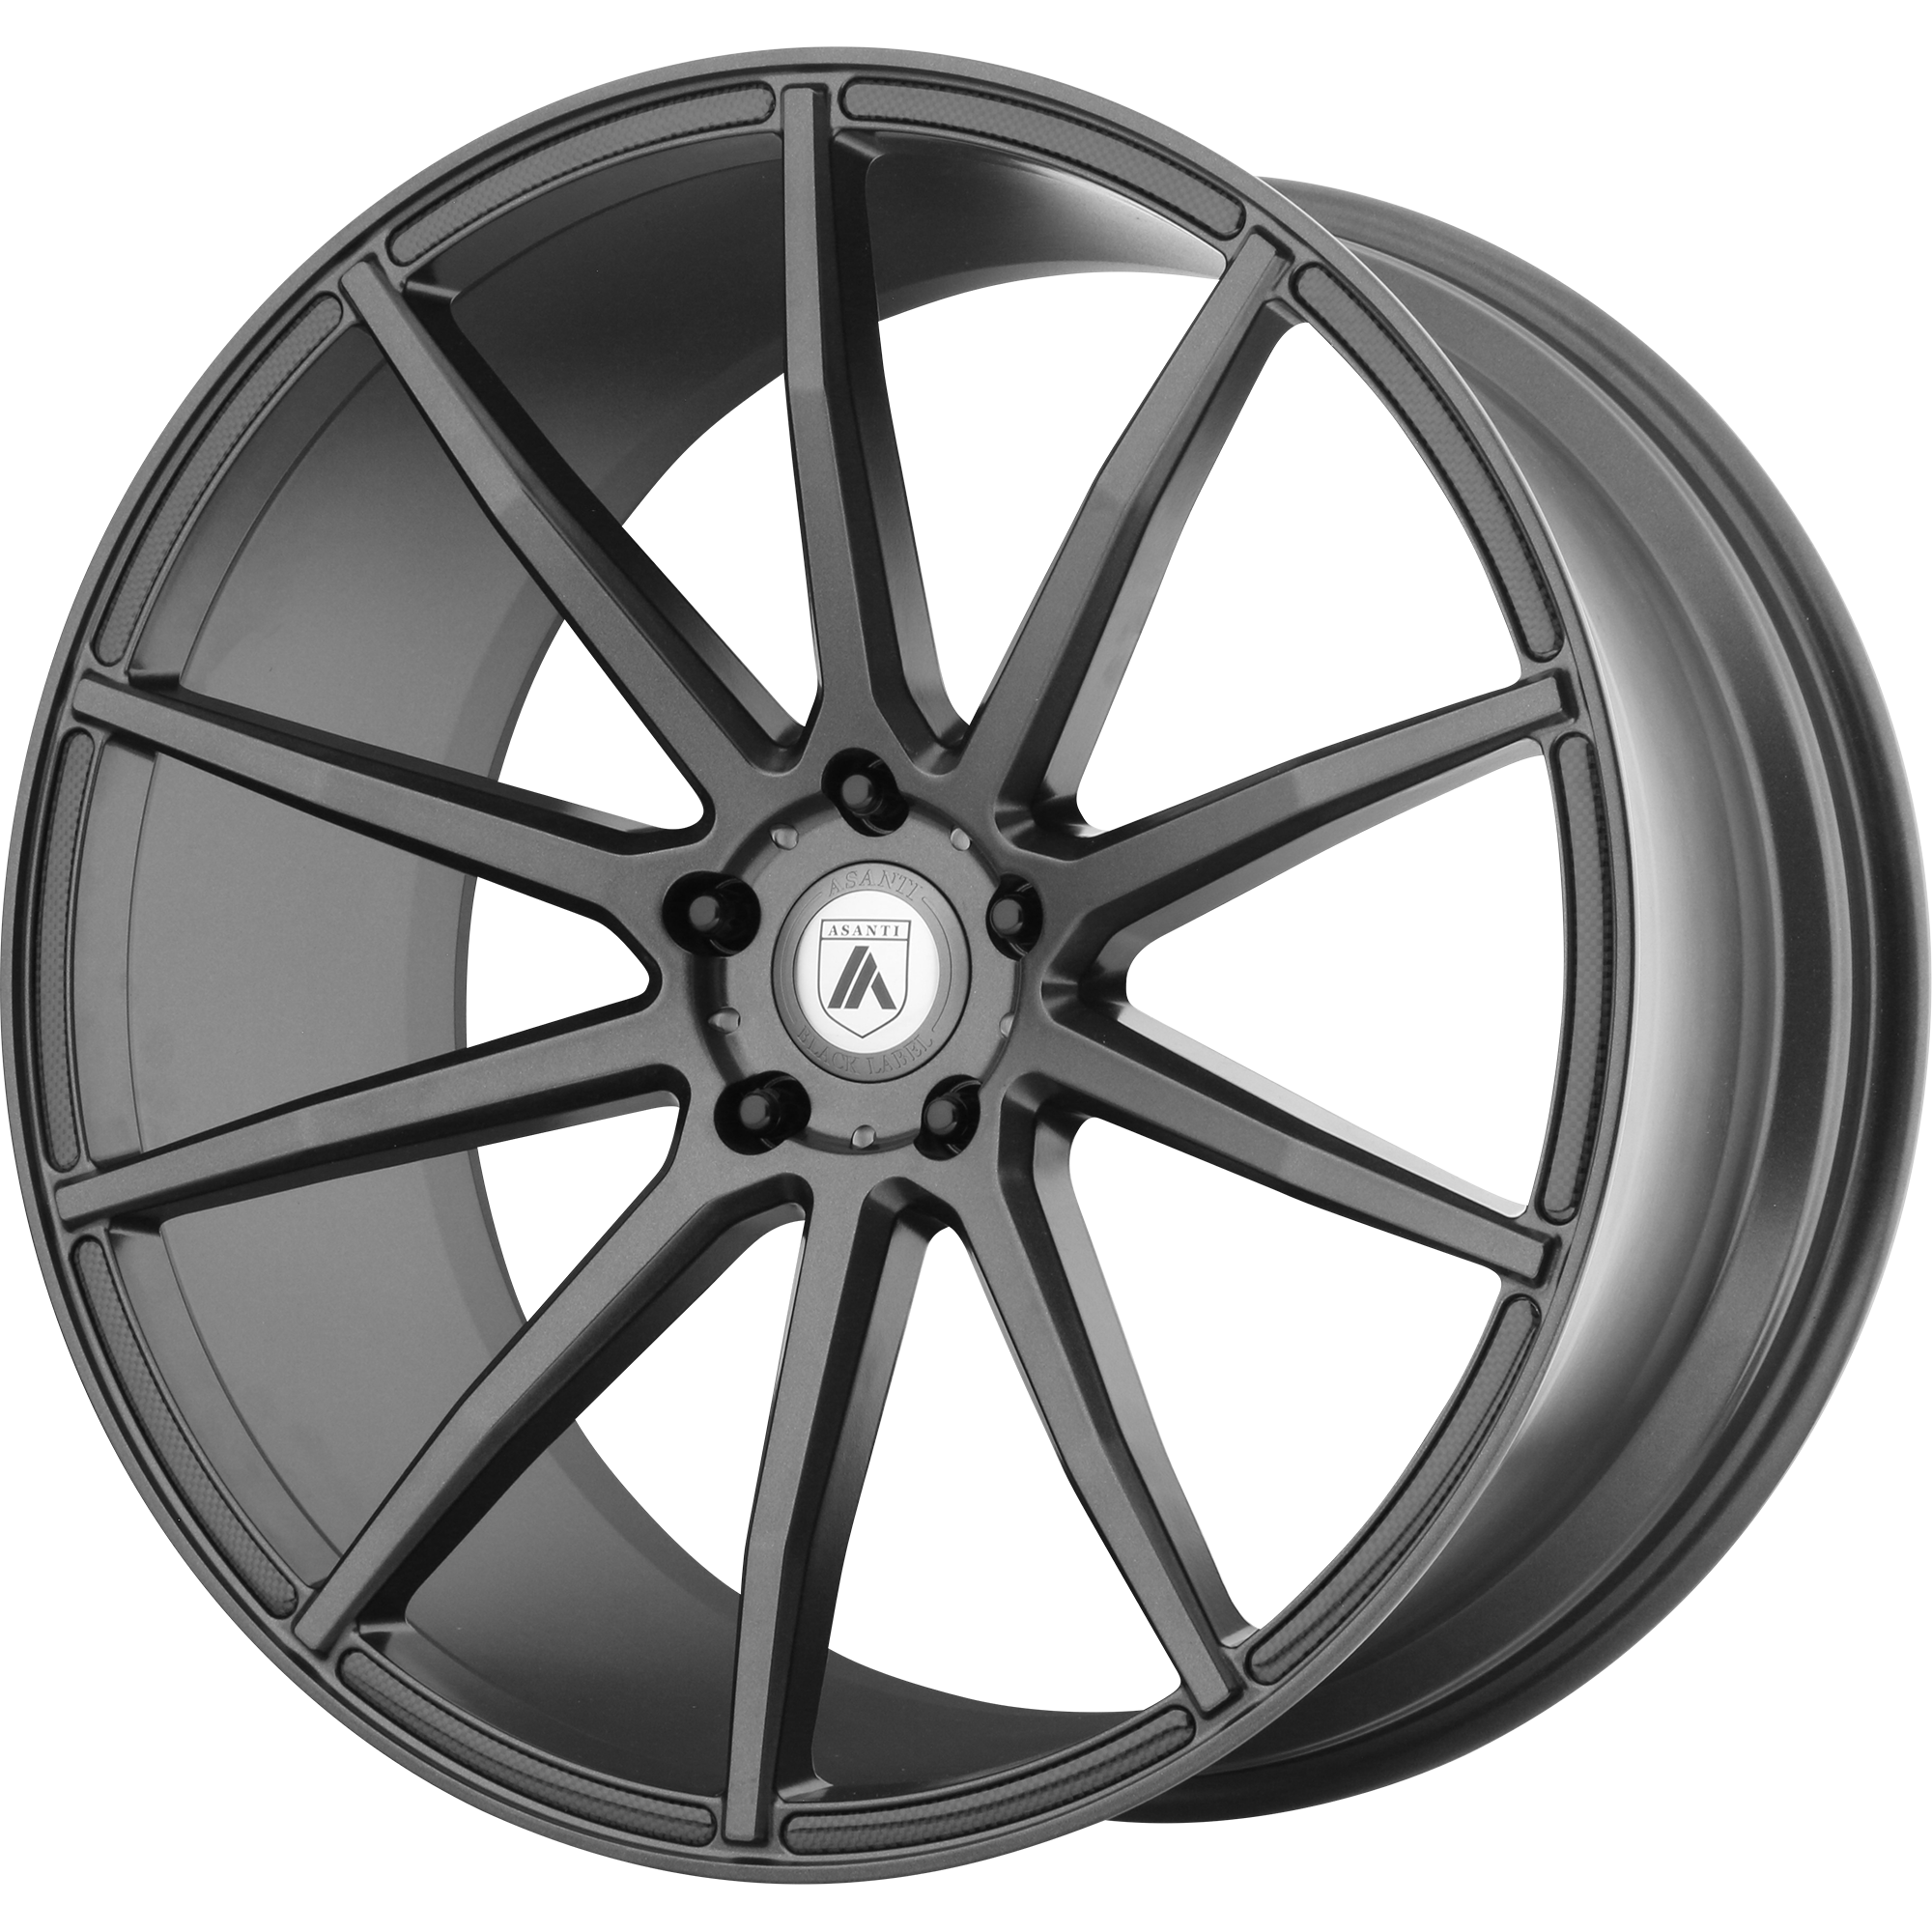 ARIES 22x9 5x115.00 MATTE GRAPHITE (15 mm) - Tires and Engine Performance